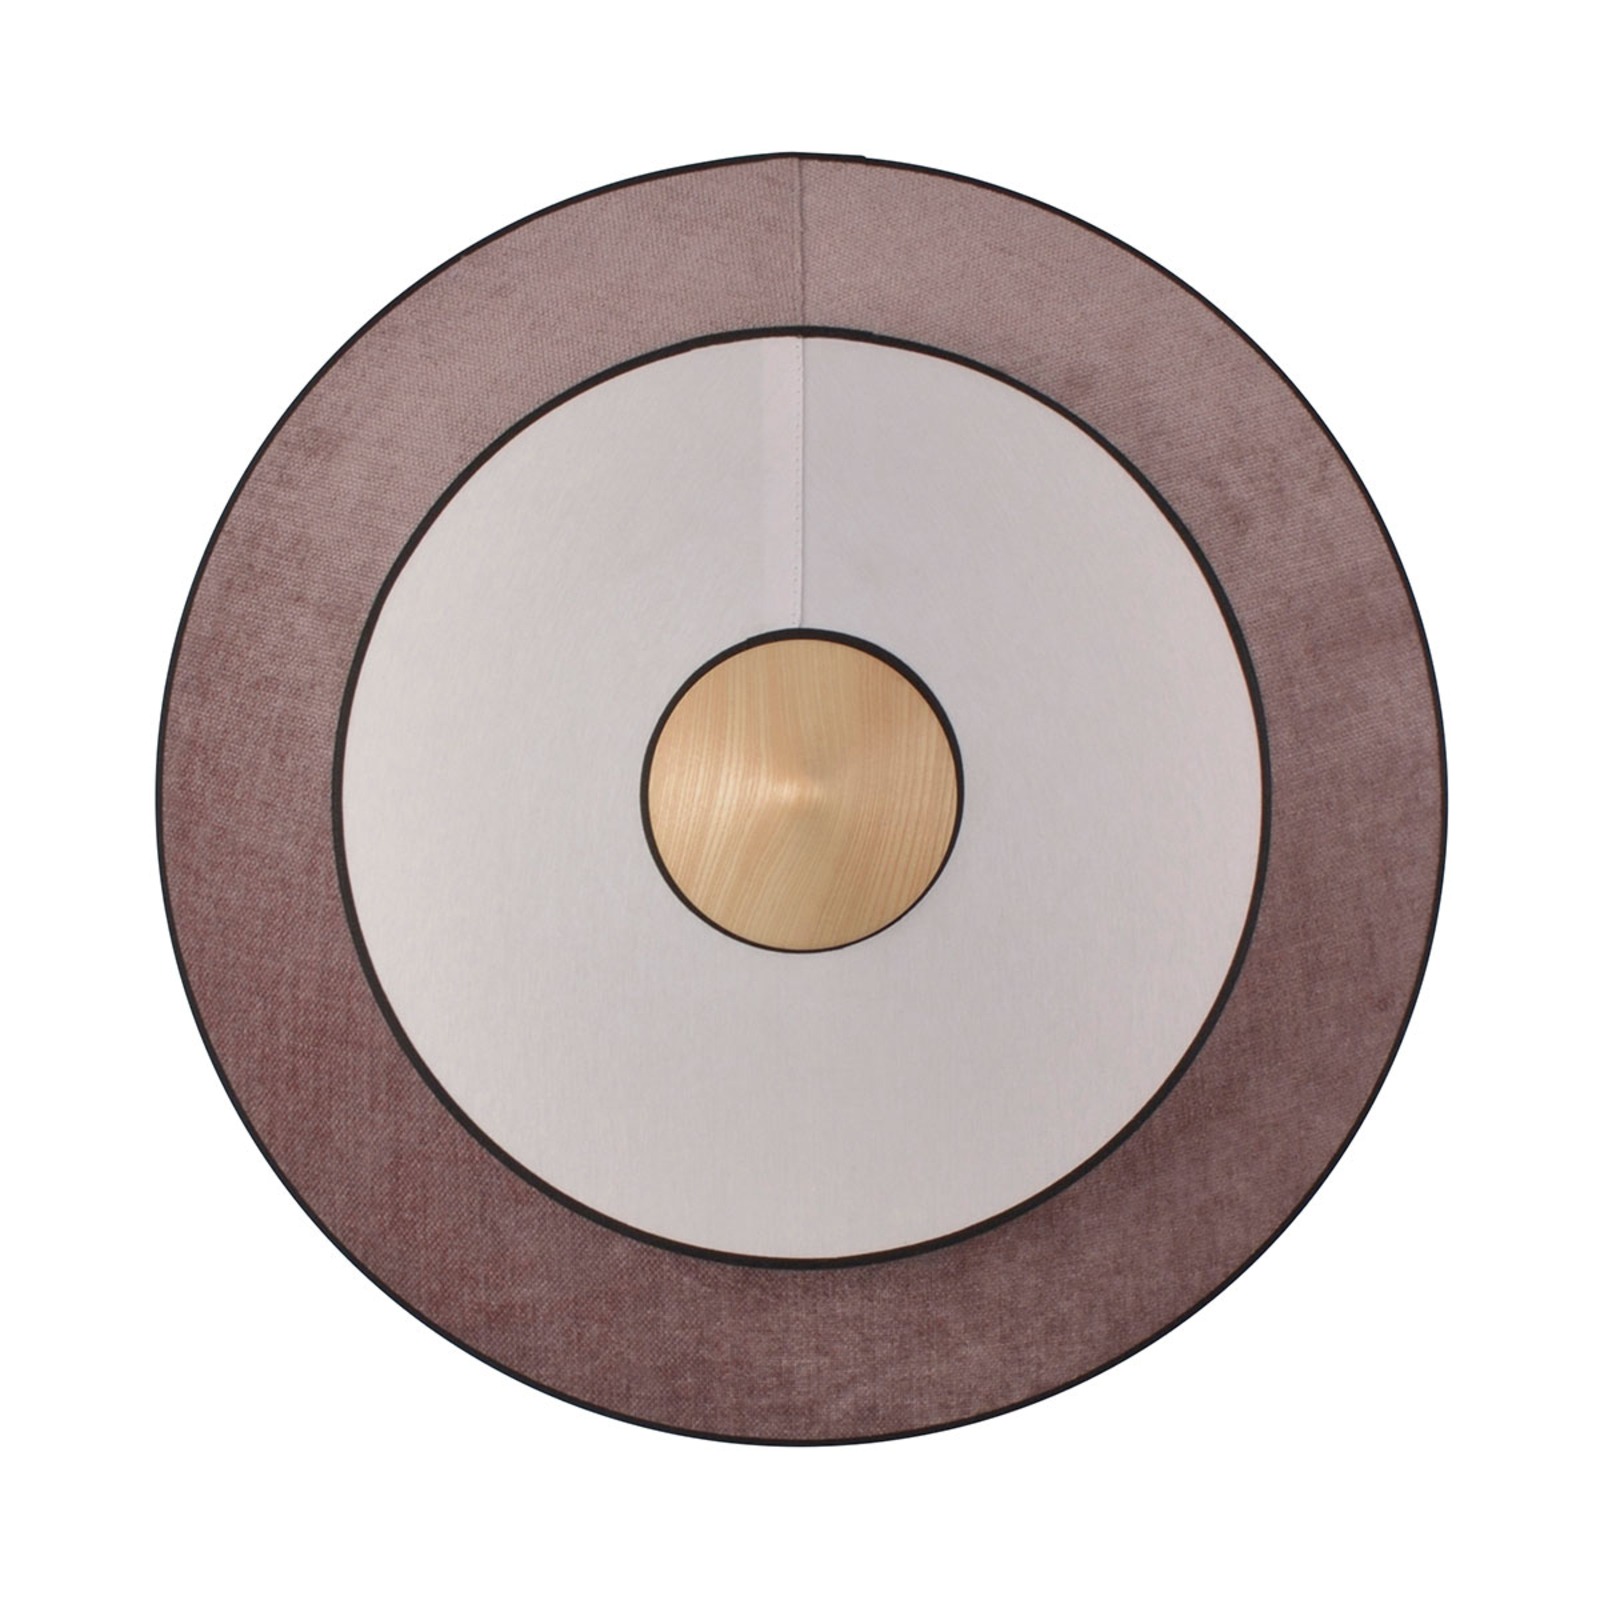 Forestier Cymbal S LED-vägglampa, puderrosa